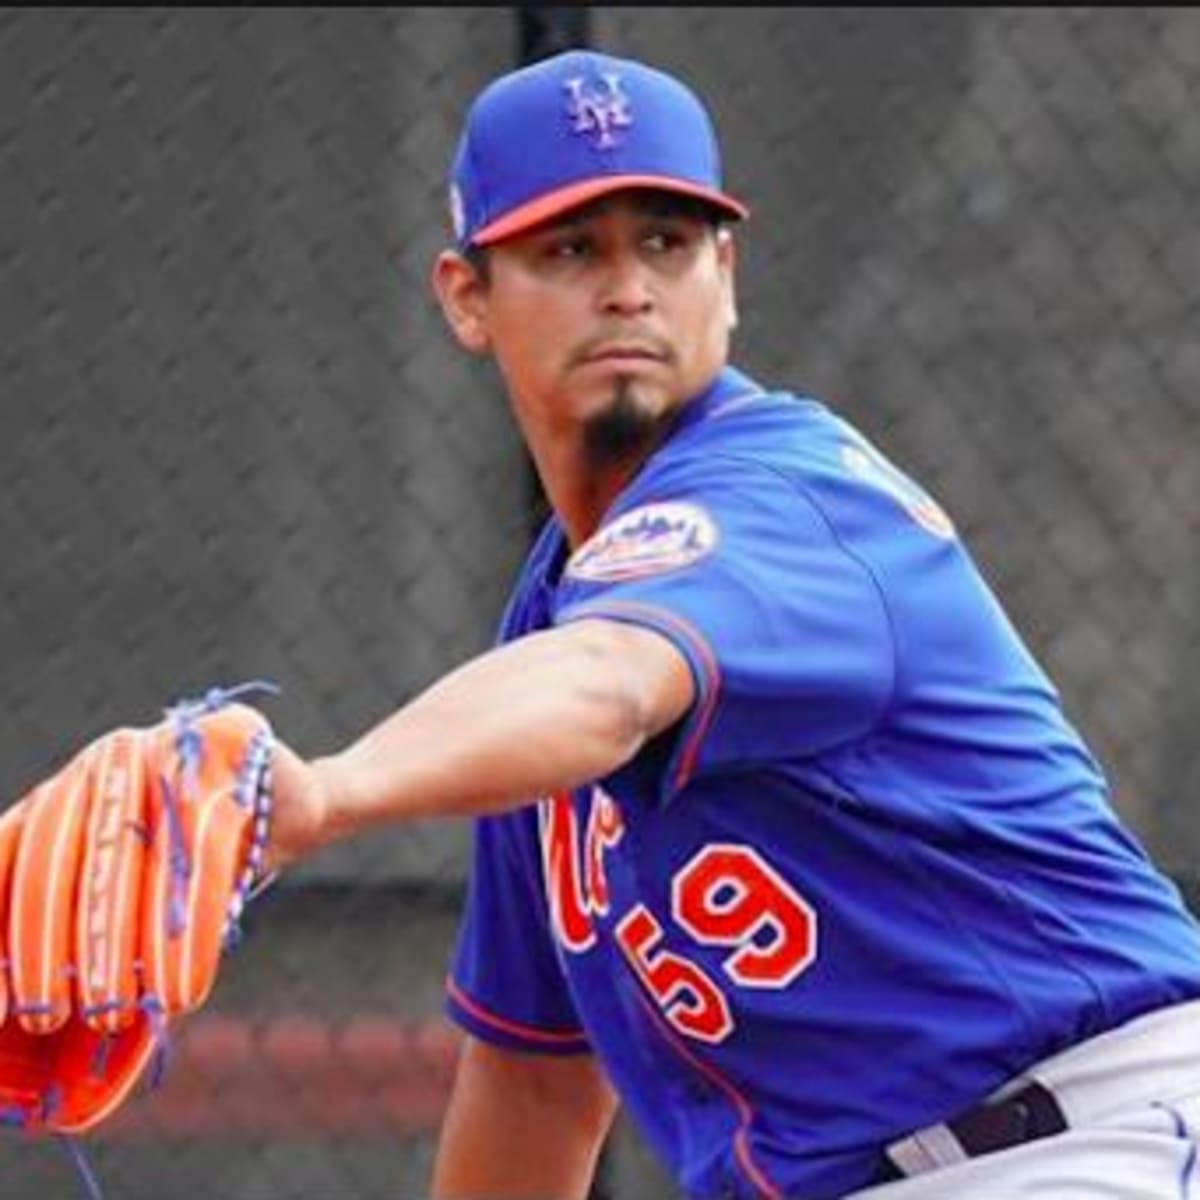 Mets' Carlos Carrasco went to ridiculous lengths to stay in game